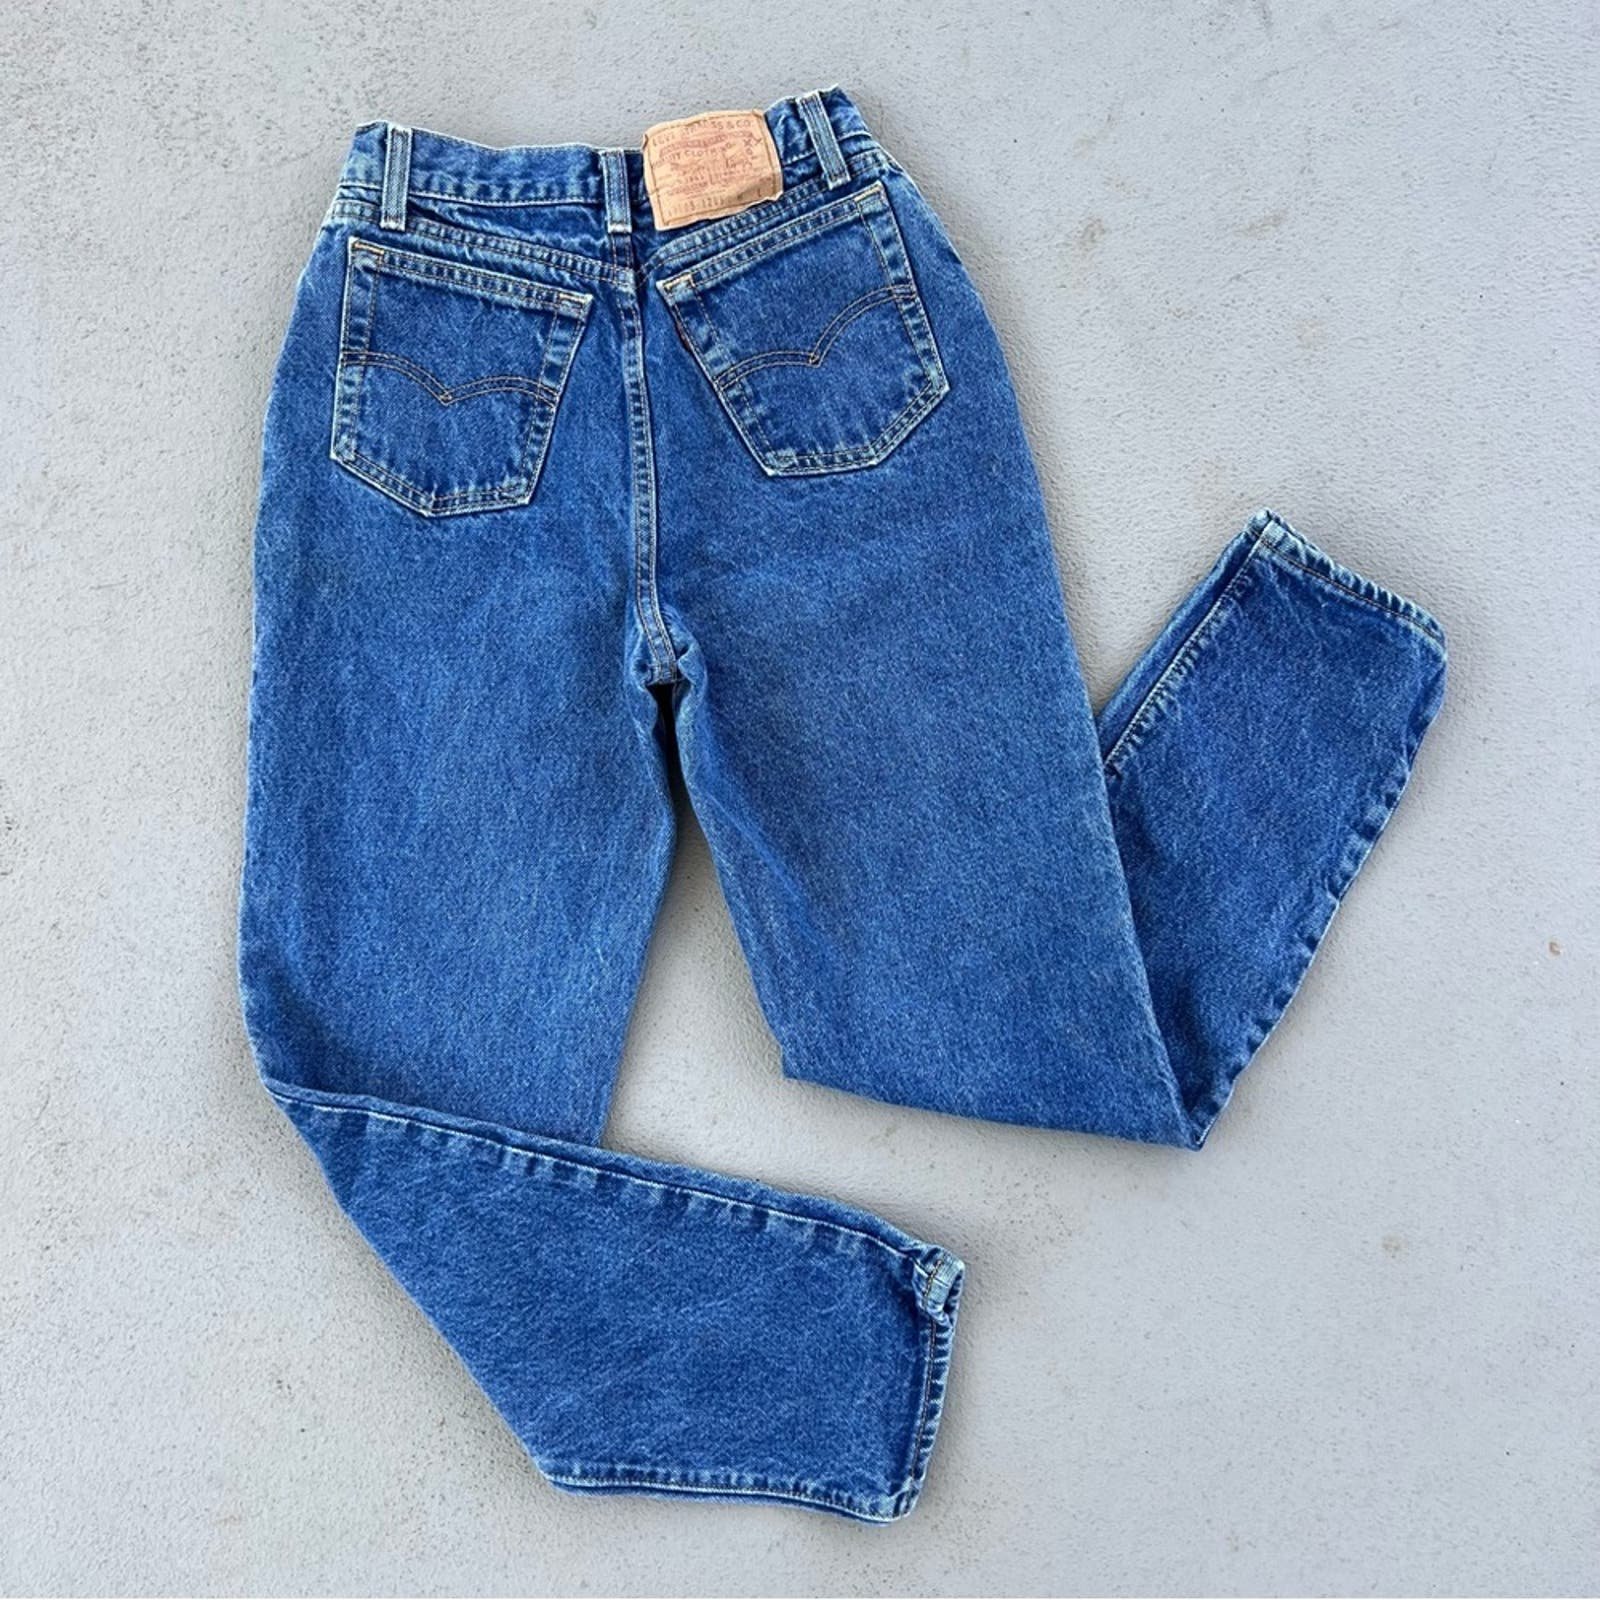 High quality Vintage 80s Levi’s women’s 505 jeans taper